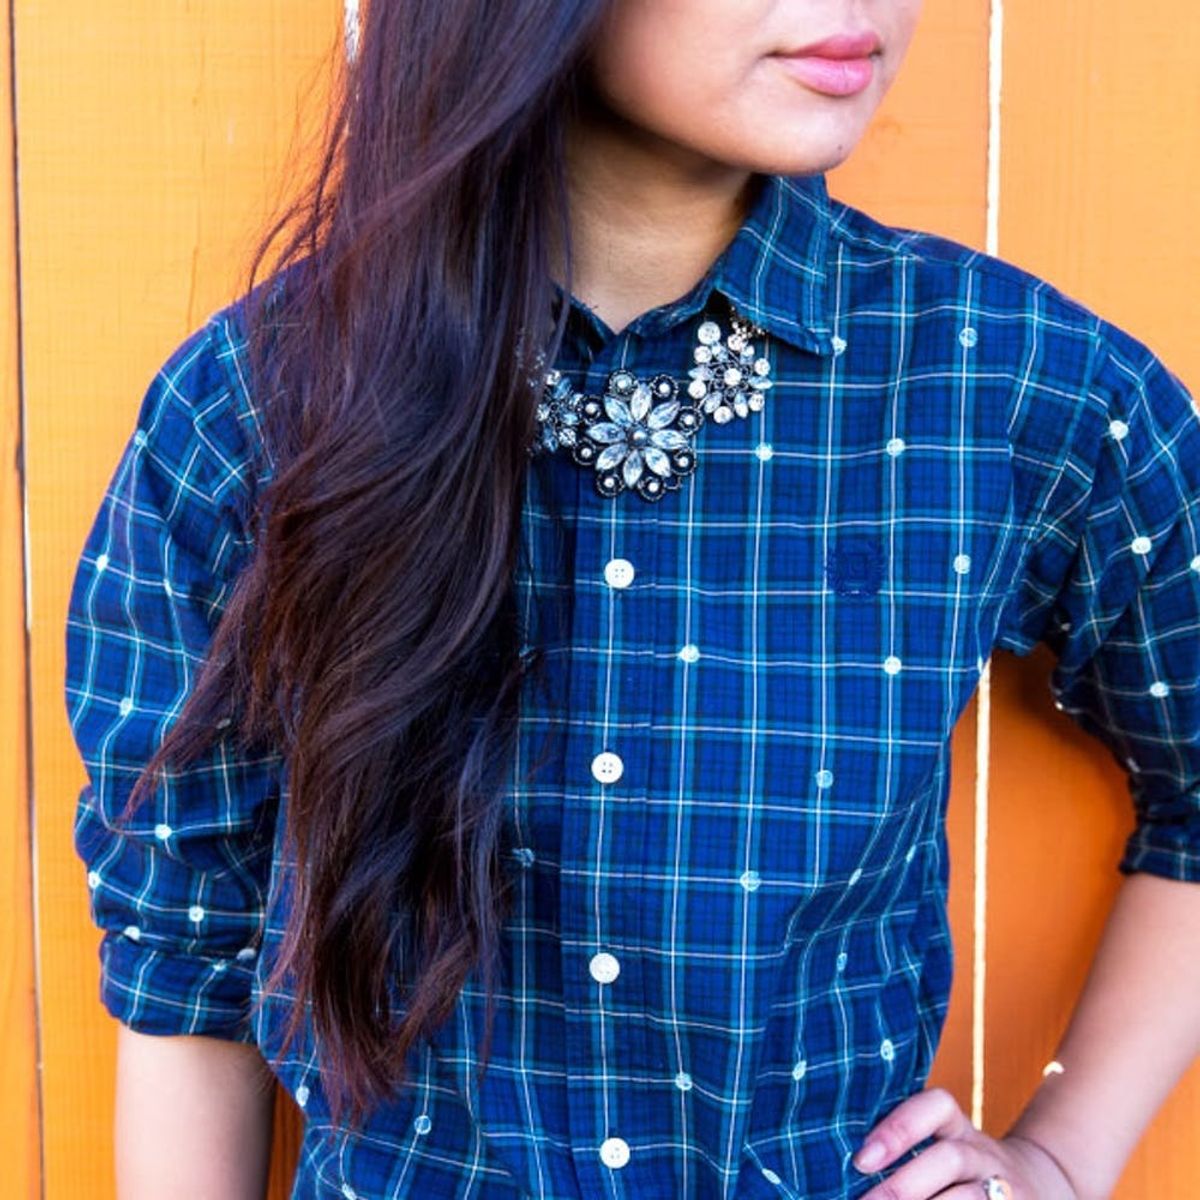 This No-Sew DIY Will Upgrade Your Plaid Shirt in Just 2 Steps